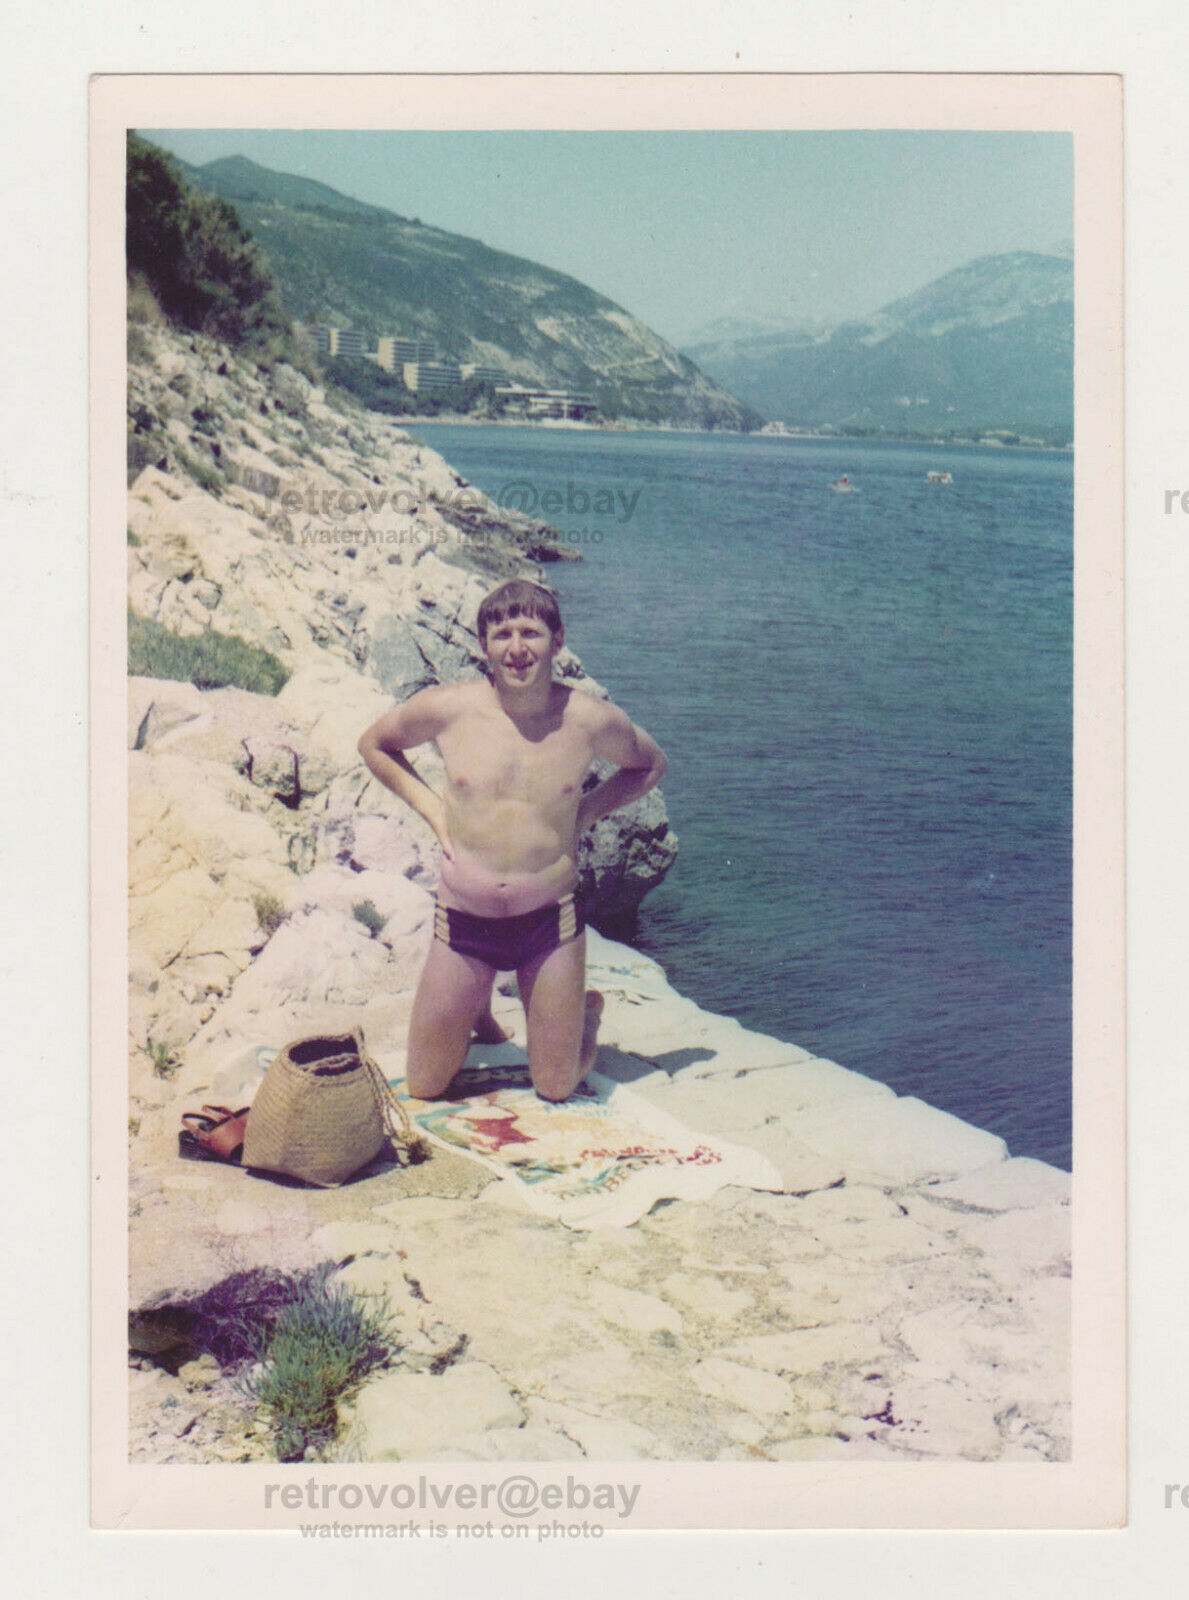 Affectionate Handsome Young Man Shirtless Male Beach Bulge Gay Int Old Photo